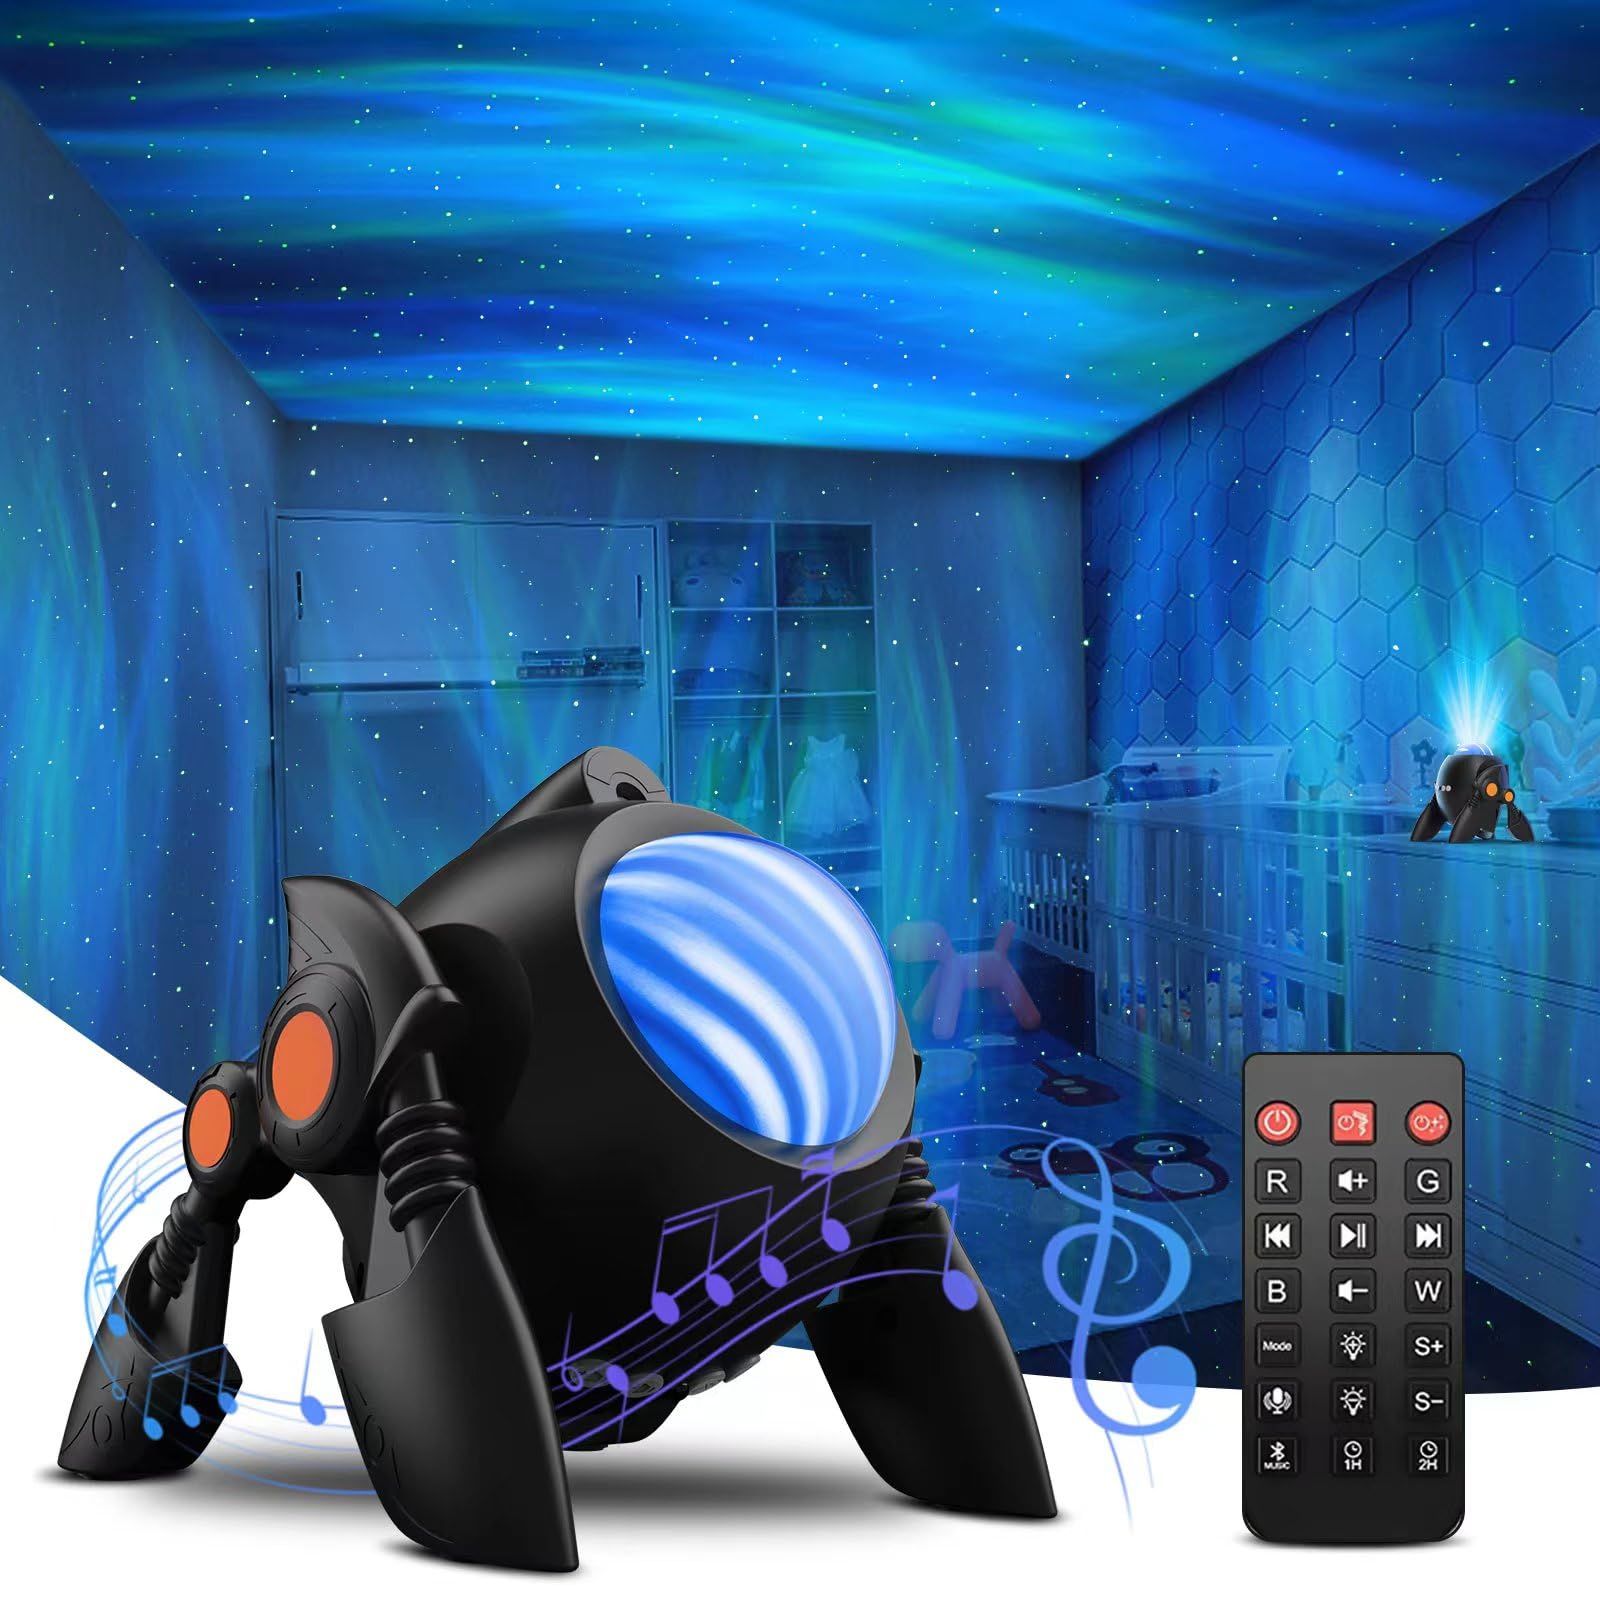 Star Projector, Galaxy Starry Projection Lamp, Bluetooth Speaker Aurora  Lighting with Timer and Remote Control, LED Sky Night Light for Kids  Bedroom